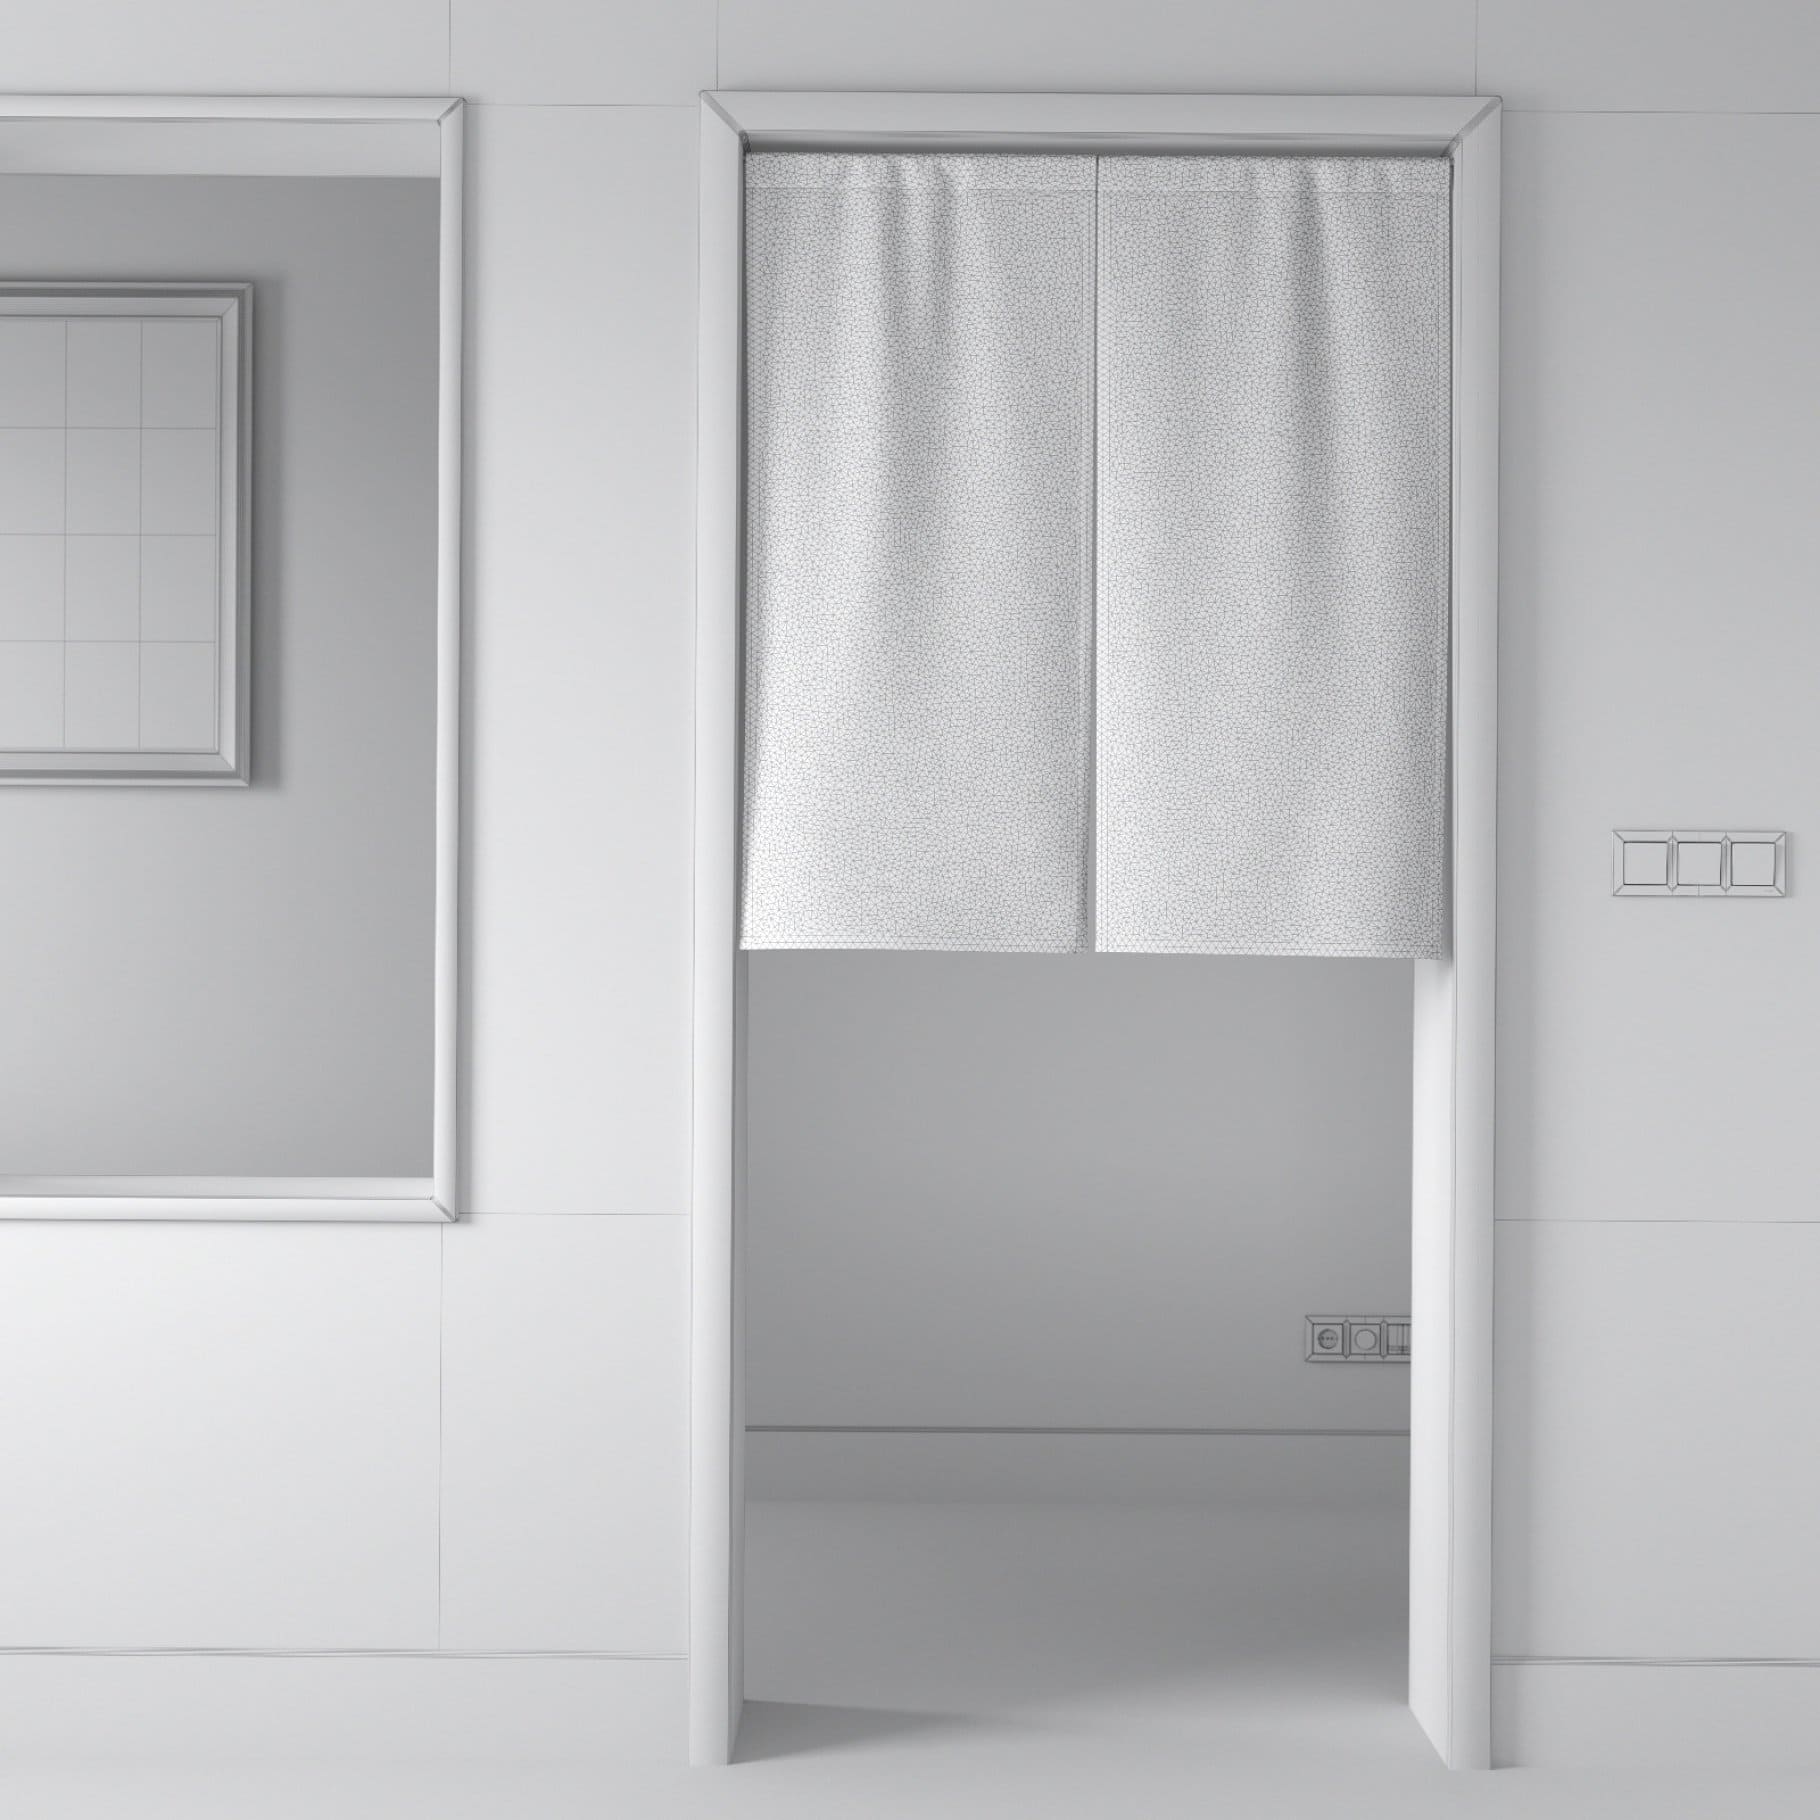 Short Japanese curtain in light gray color in the doorway.